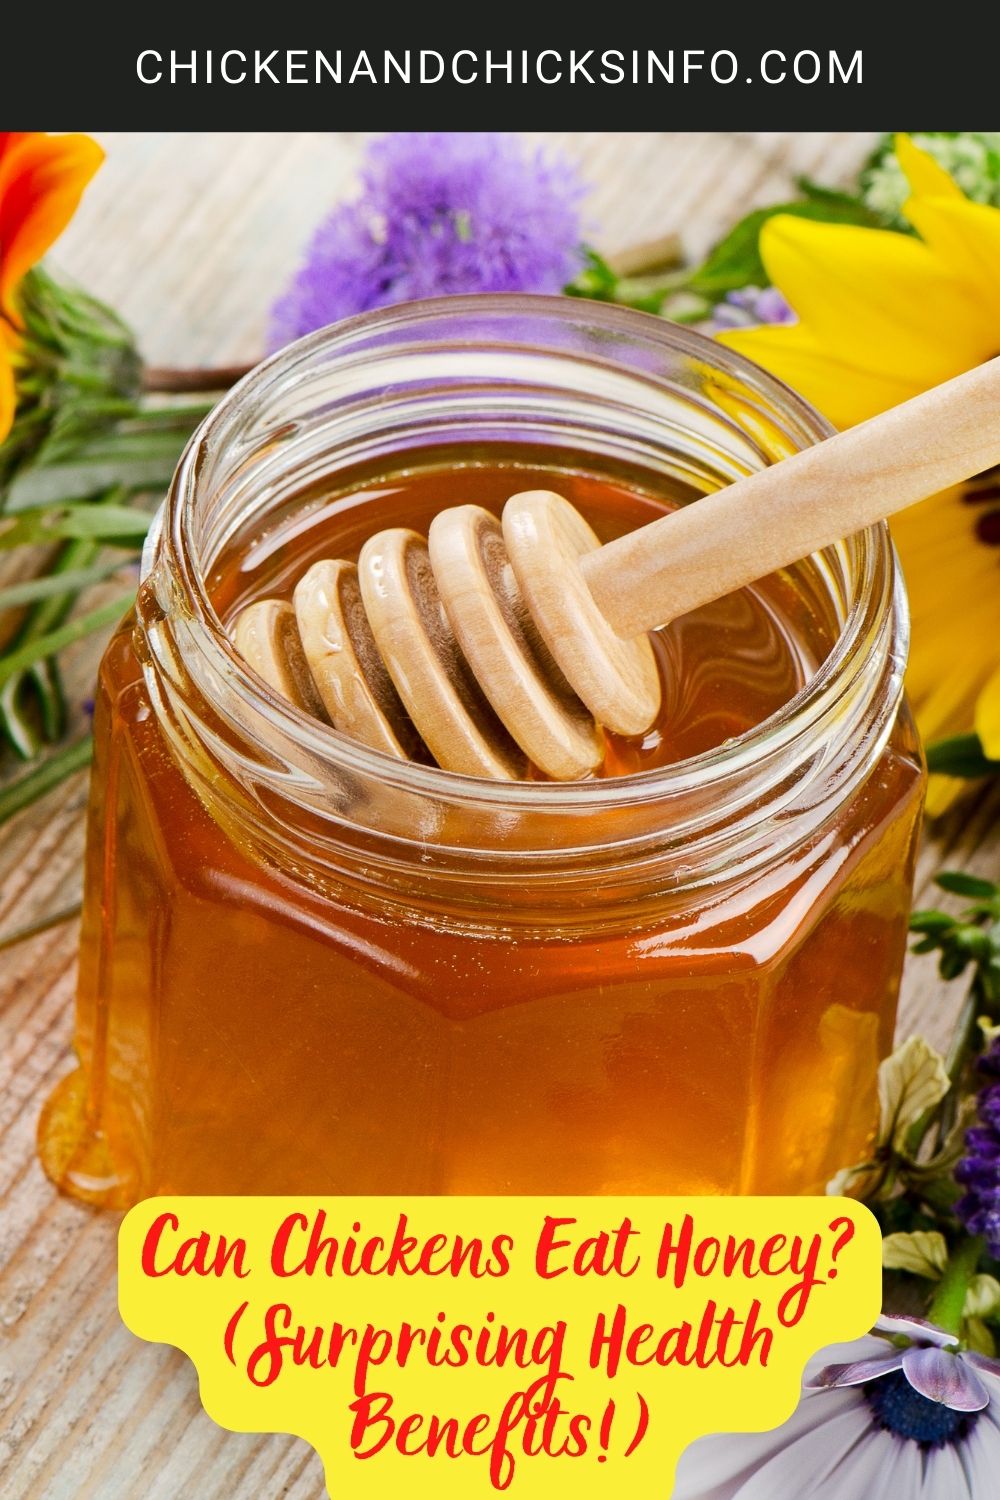 Can Chickens Eat Honey? (Surprising Health Benefits!) poster.
